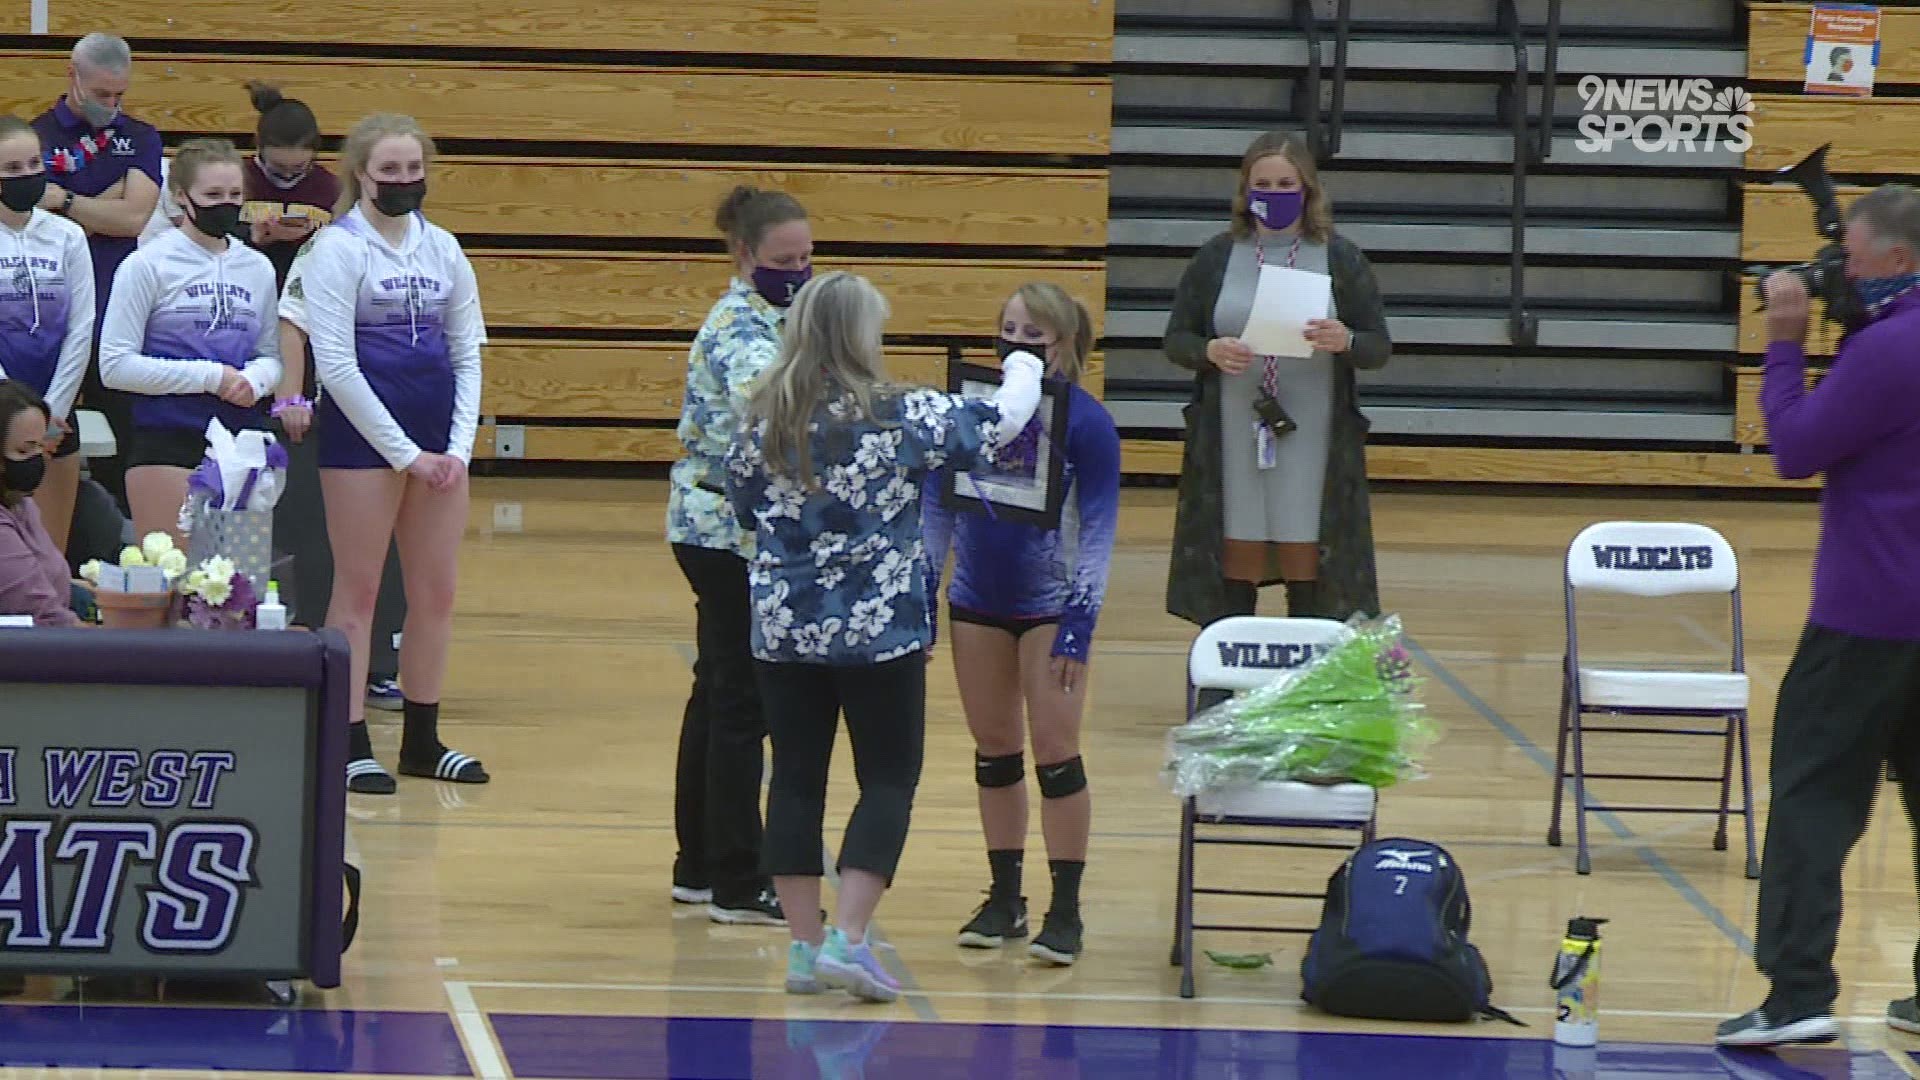 The Rebels are now 8-0 after winning in three sets on Monday night, but it was a special evening for Arvada West as they honored long-time head coach Debra Pospisil.